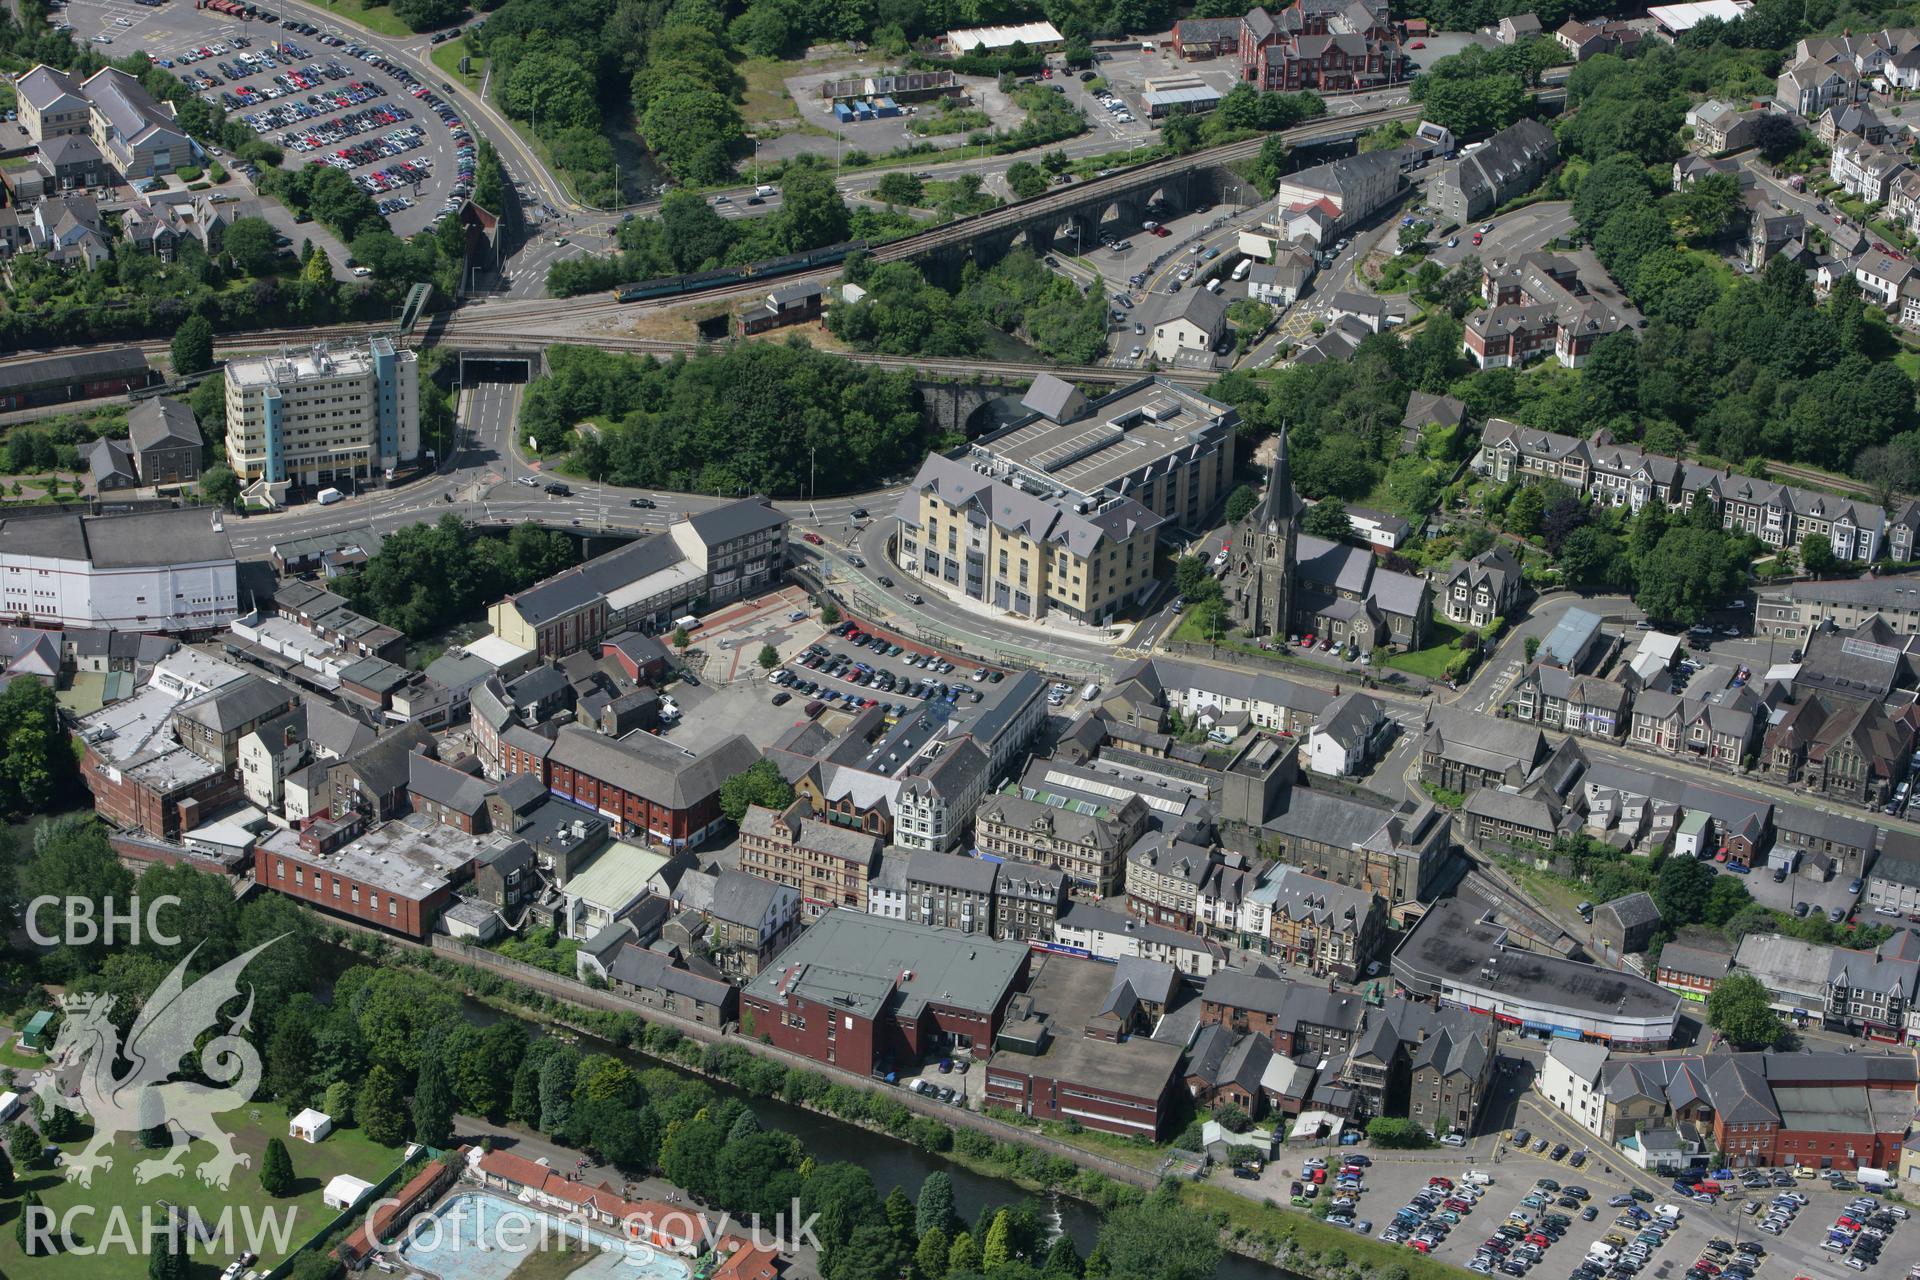 RCAHMW colour oblique photograph of Pontypridd, with St Catherine's Church and the Taff Vale Railway Viaduct. Taken by Toby Driver on 21/07/2008.